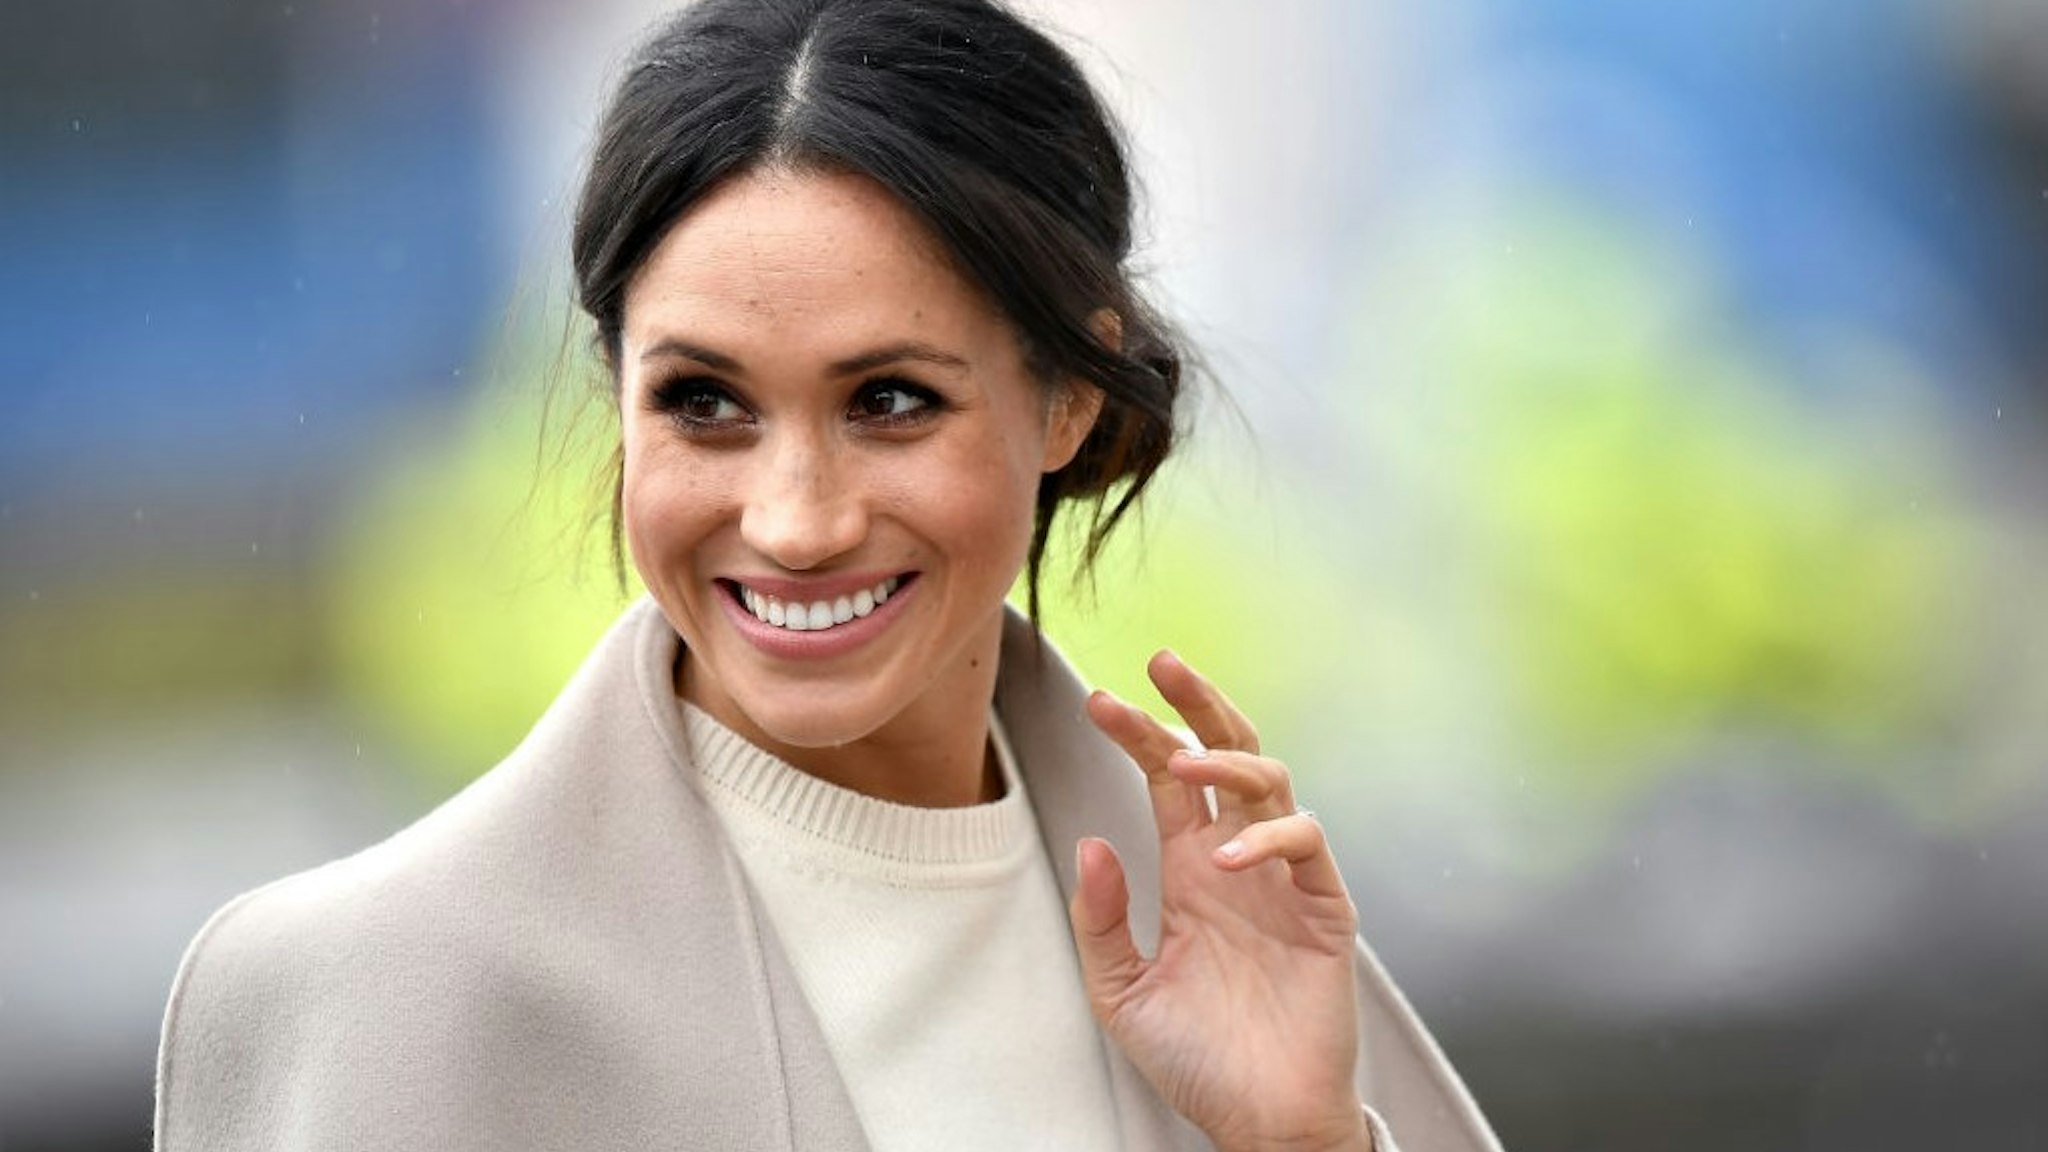 BELFAST, UNITED KINGDOM - MARCH 23: Meghan Markle is seen ahead of her visit with Prince Harry to the iconic Titanic Belfast during their trip to Northern Ireland on March 23, 2018 in Belfast, Northern Ireland, United Kingdom. (Photo by